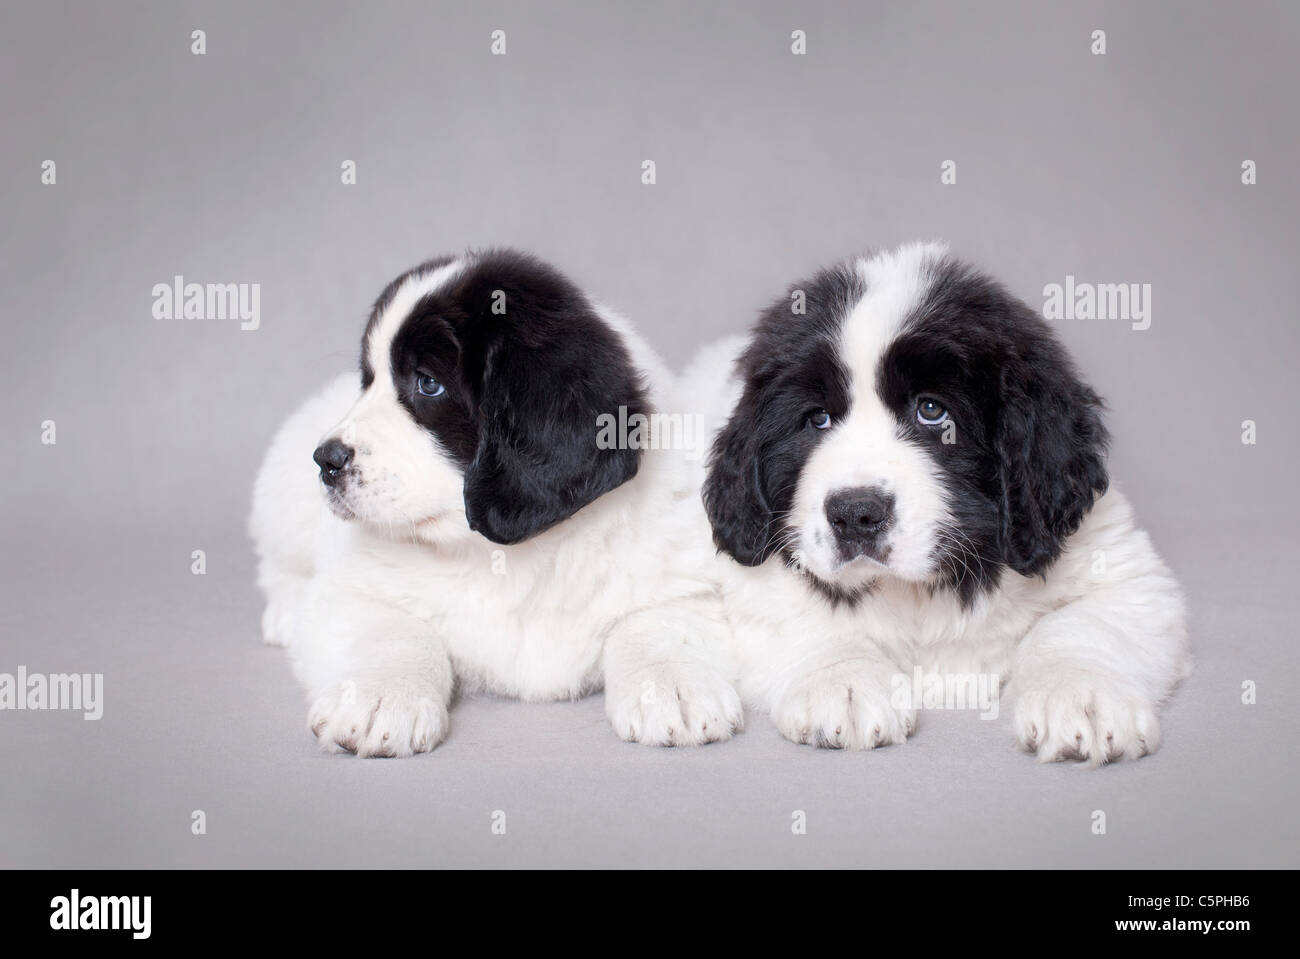 Two little Landseer (newfoundland type) puppies portrait at grey background Stock Photo